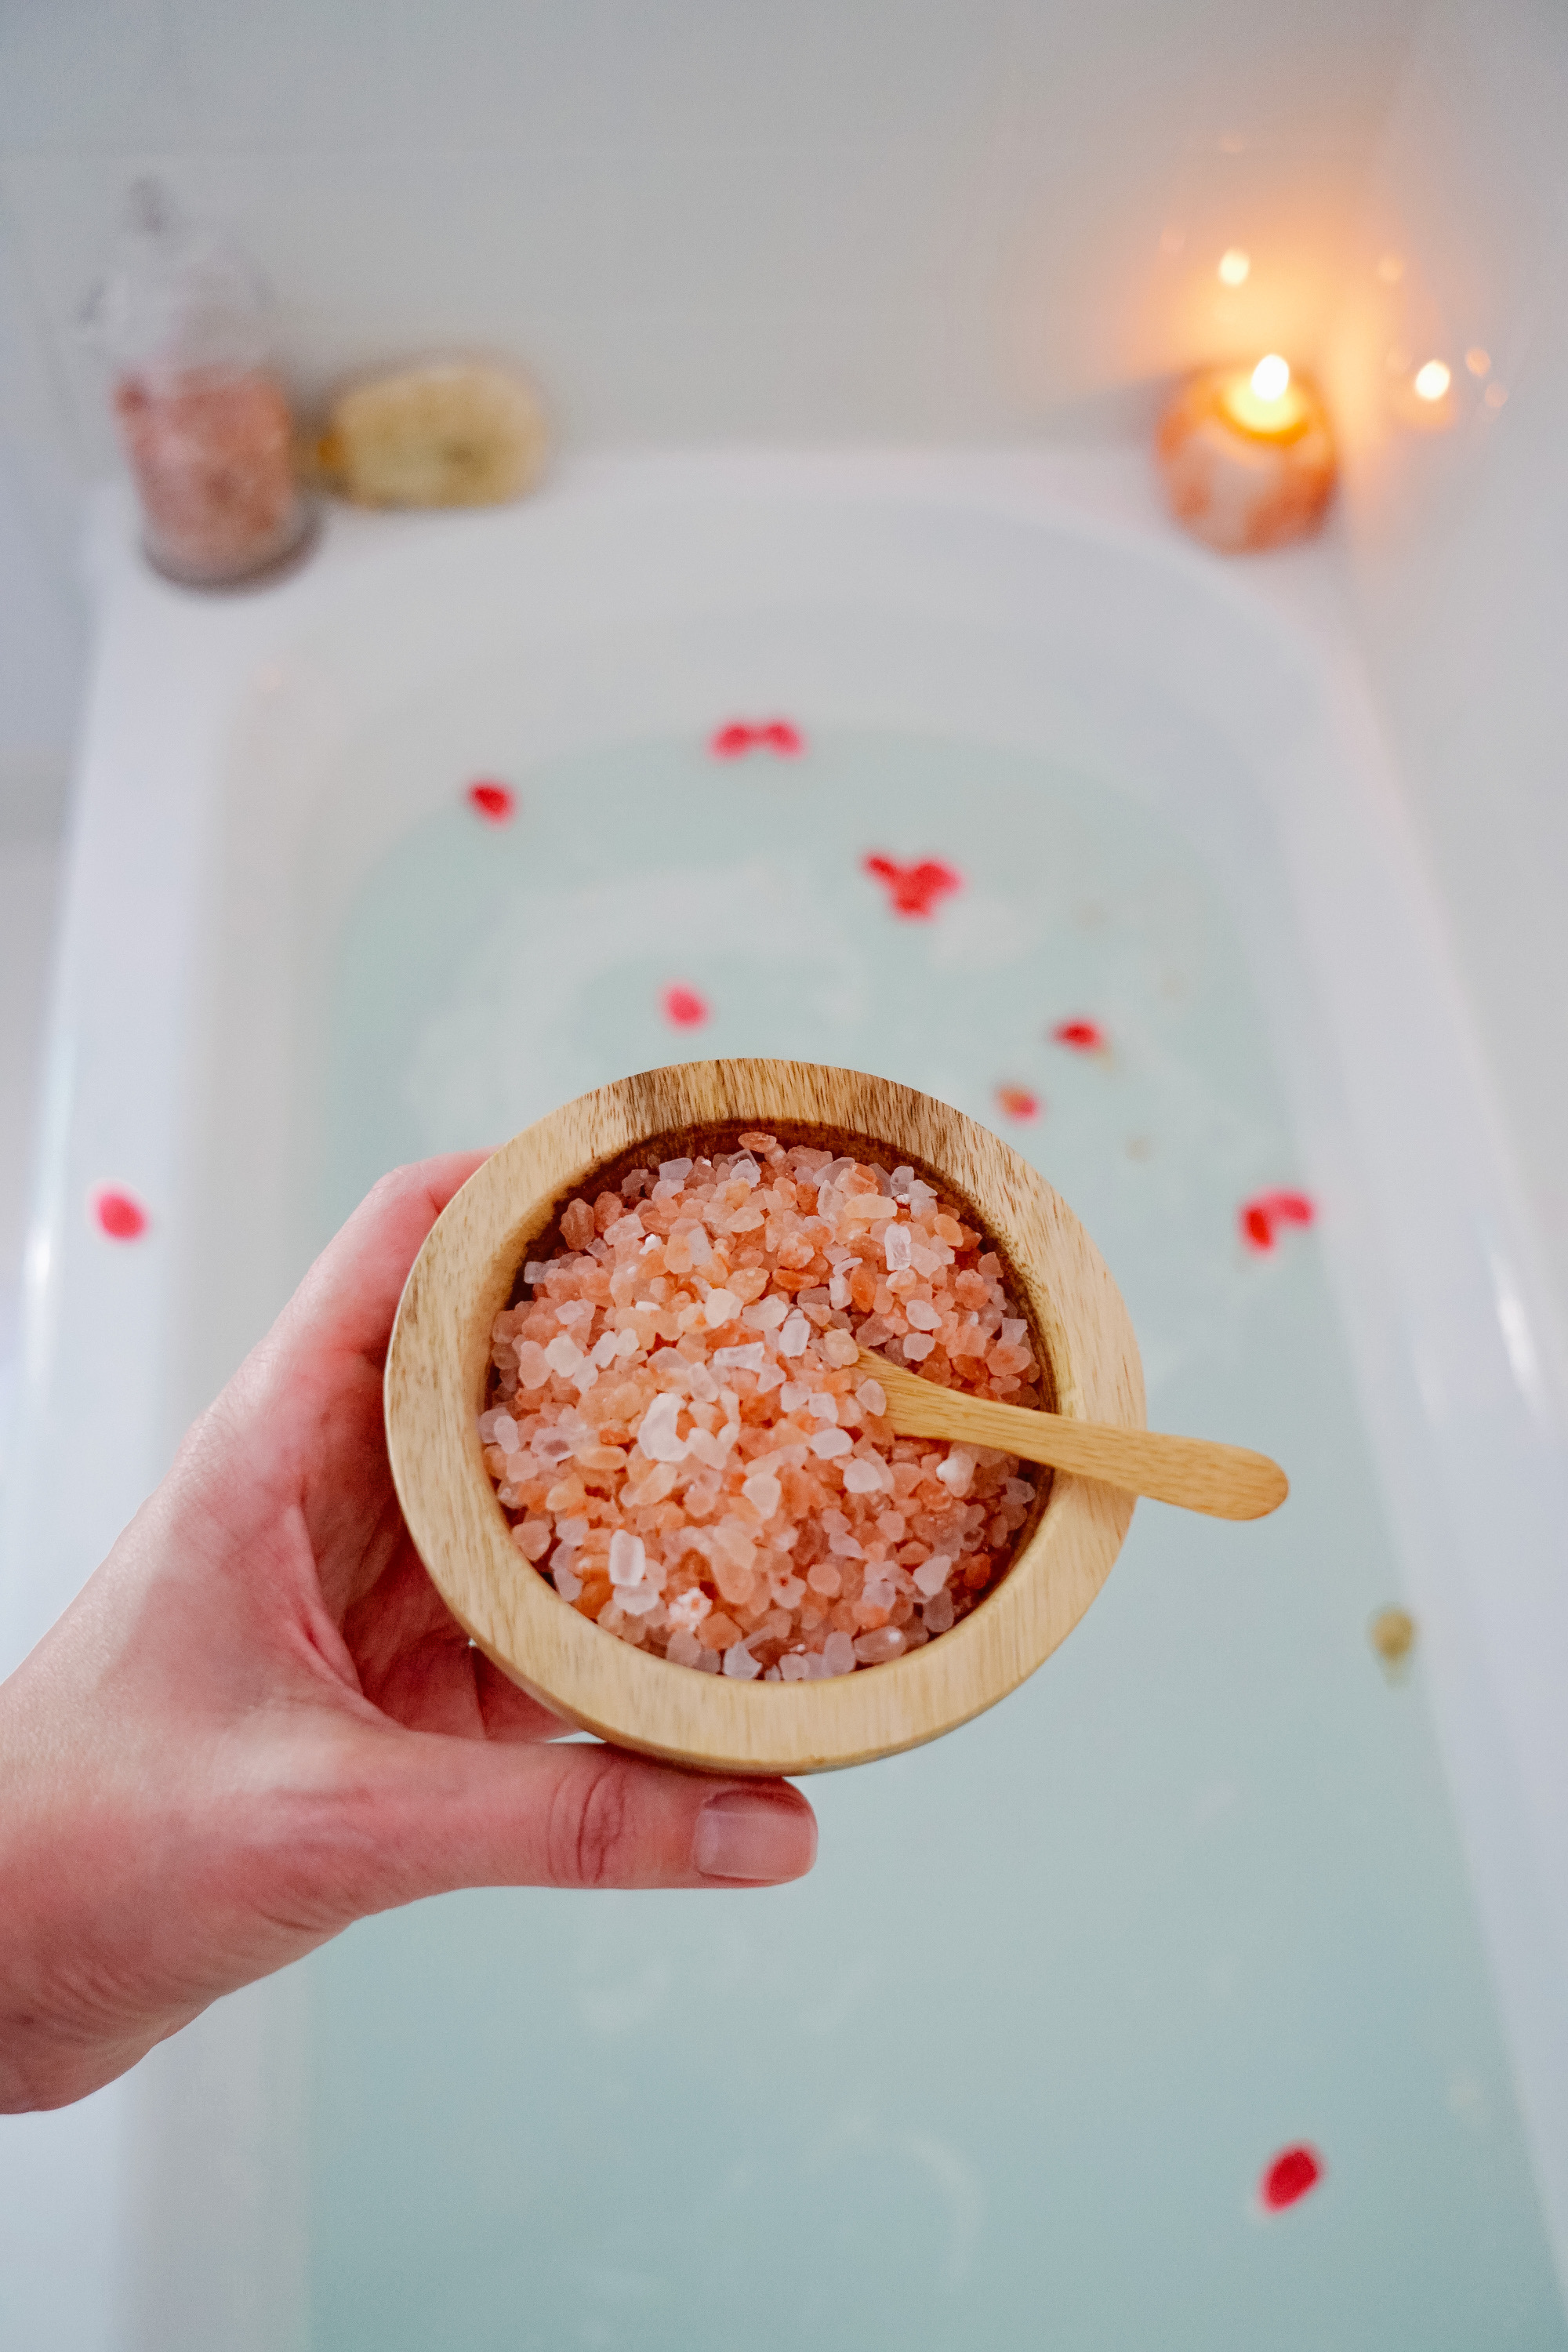 Holding a bowl of pink salt above bath full of water